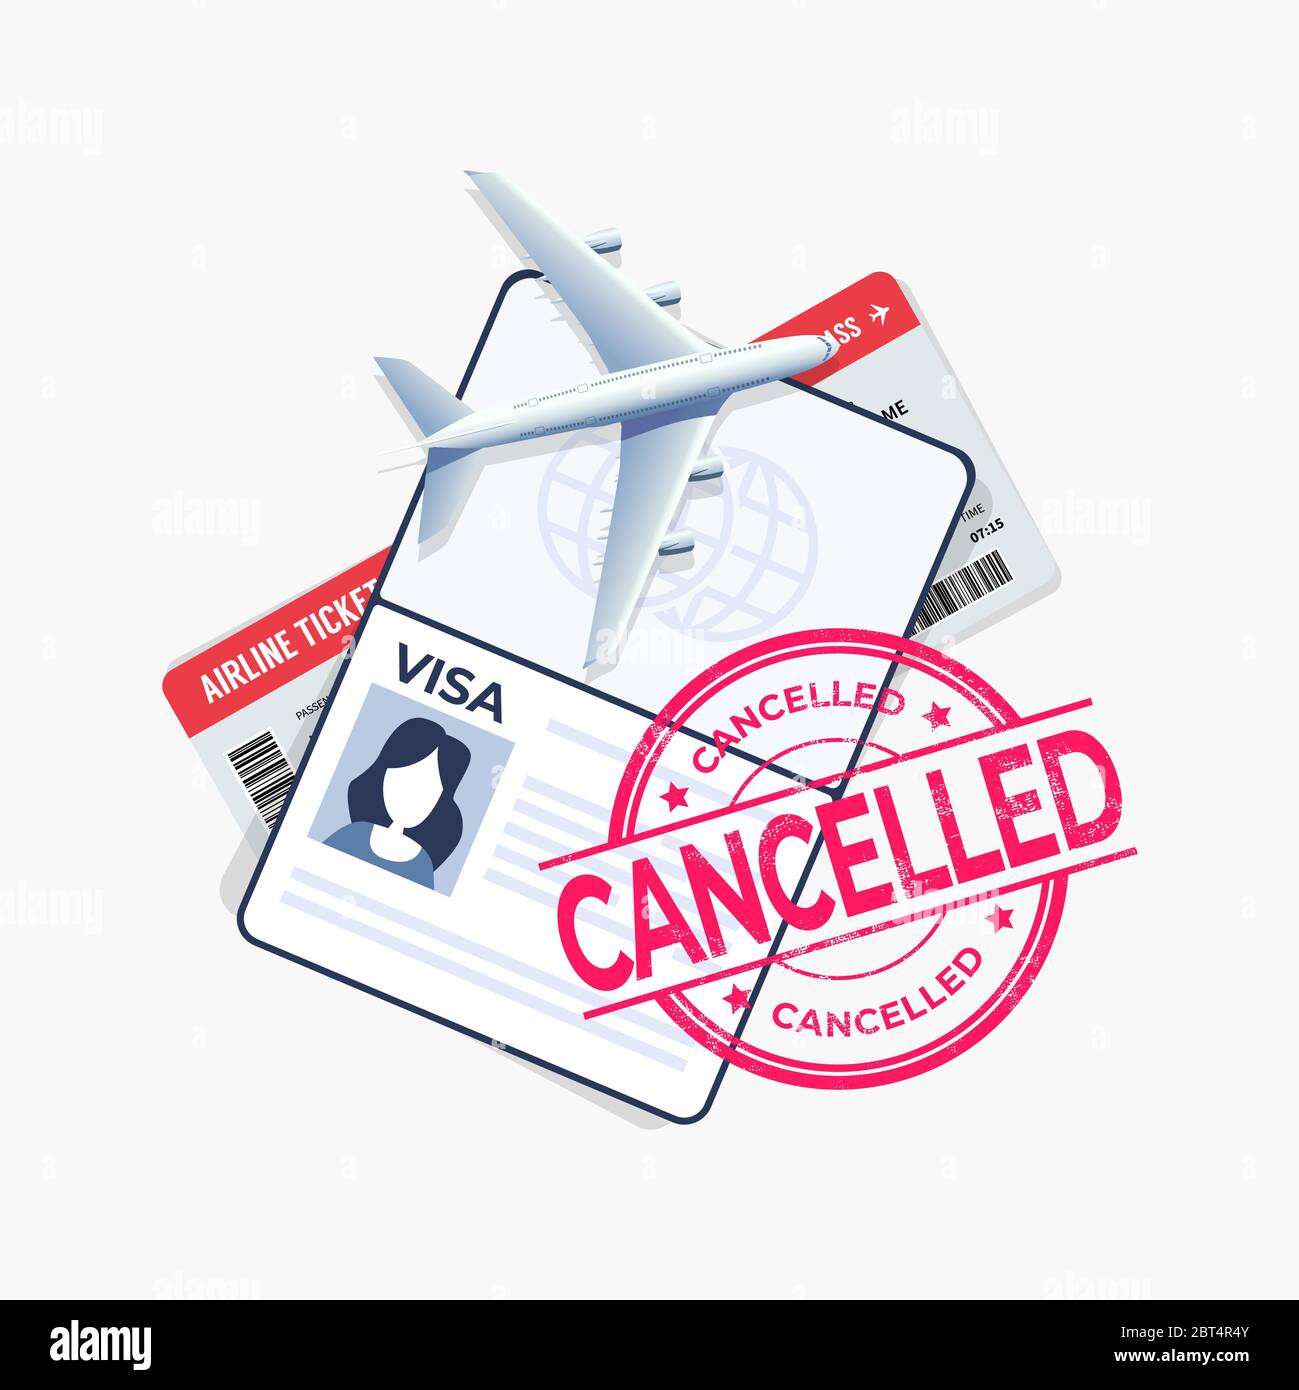 The flight is cancelled with the passport and travel ticket. Stock Vector